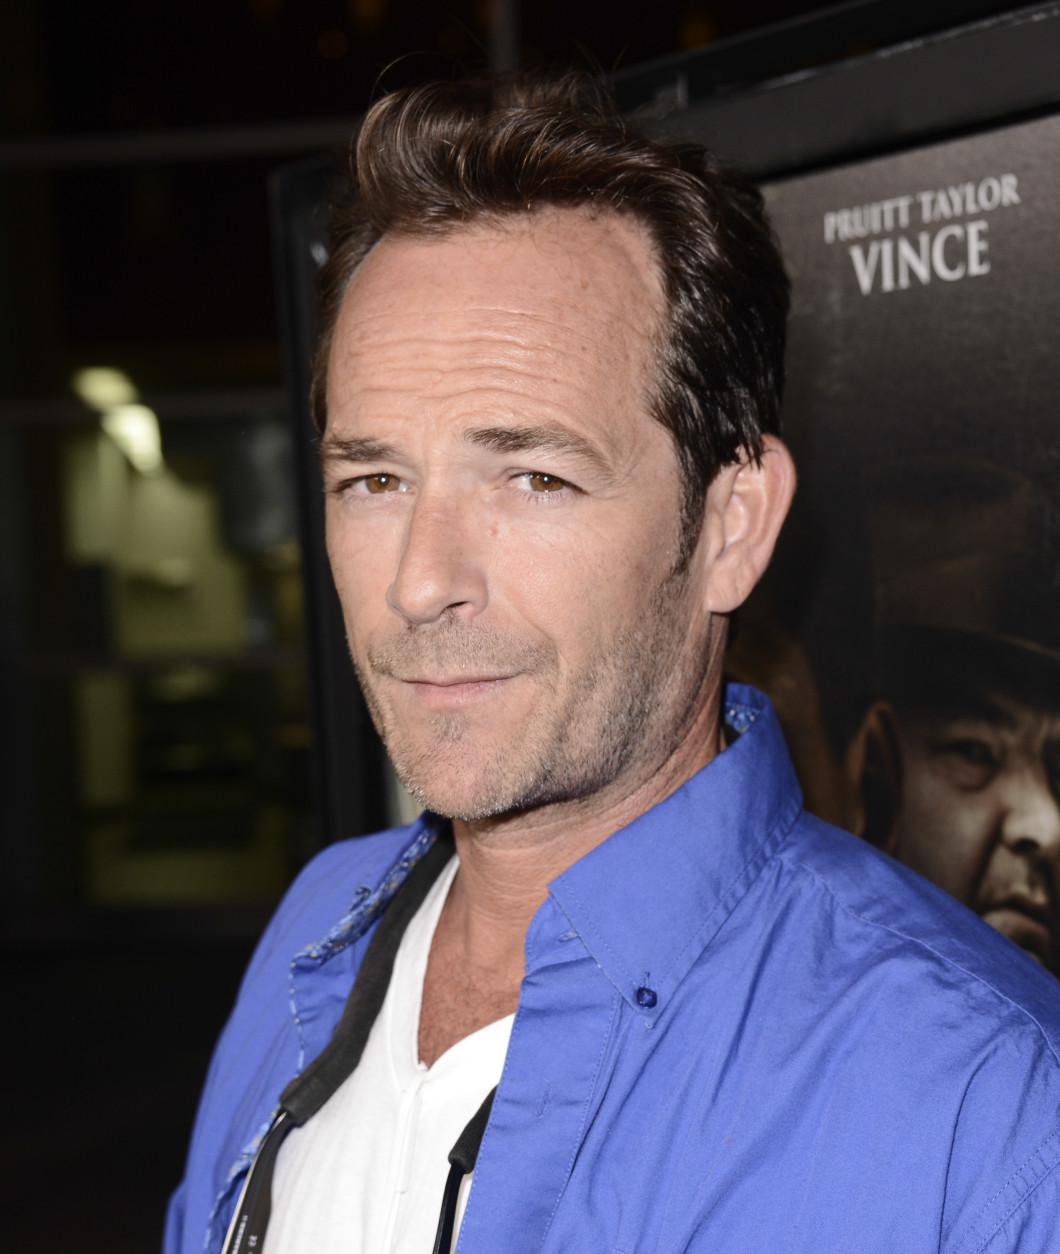 Actor Luke Perry arrives on the red carpet at the premiere of the feature film "Dark Tourist" at the ArcLight Cinemas on Wednesday, August 14, 2013 in Los Angeles. (Photo by Dan Steinberg/Invision/AP)